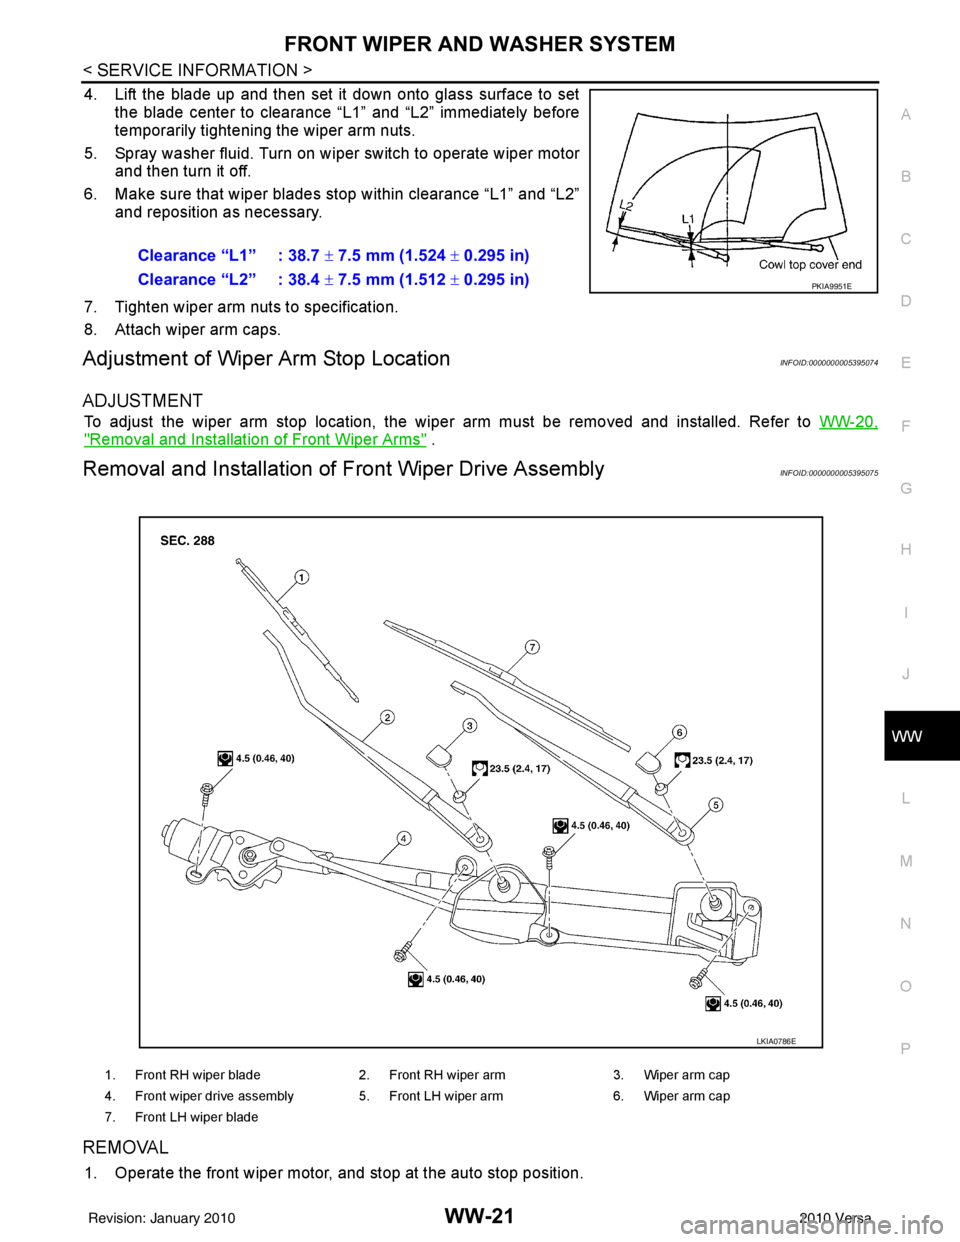 NISSAN LATIO 2010  Service Repair Manual FRONT WIPER AND WASHER SYSTEMWW-21
< SERVICE INFORMATION >
C
DE
F
G H
I
J
L
M A
B
WW
N
O P
4. Lift the blade up and then set it down onto glass surface to set the blade center to clearance “L1” an